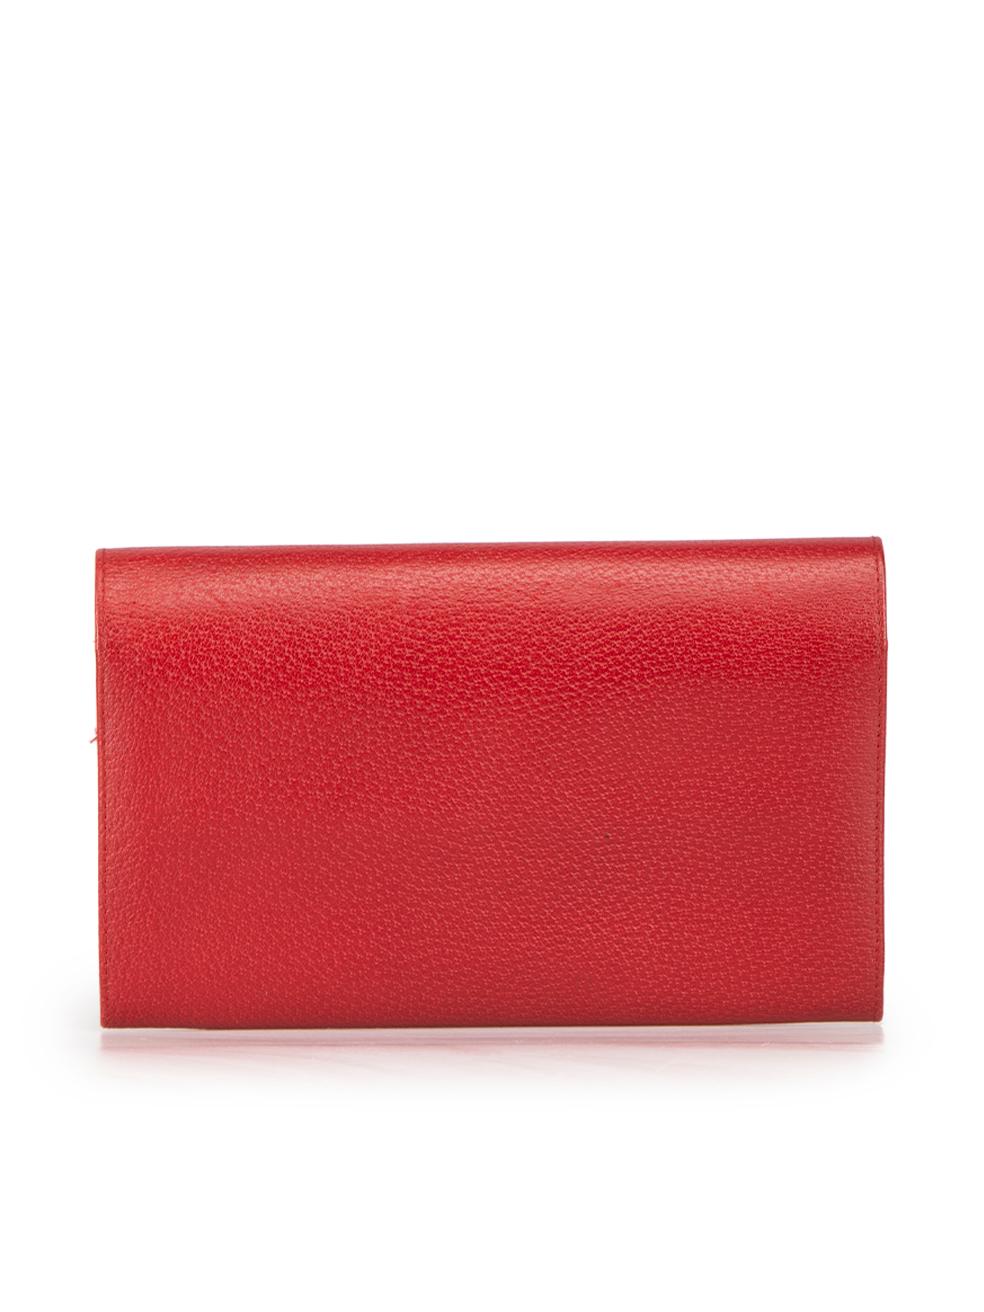 Smythson Red Leather Bifold Travel Wallet In Excellent Condition For Sale In London, GB